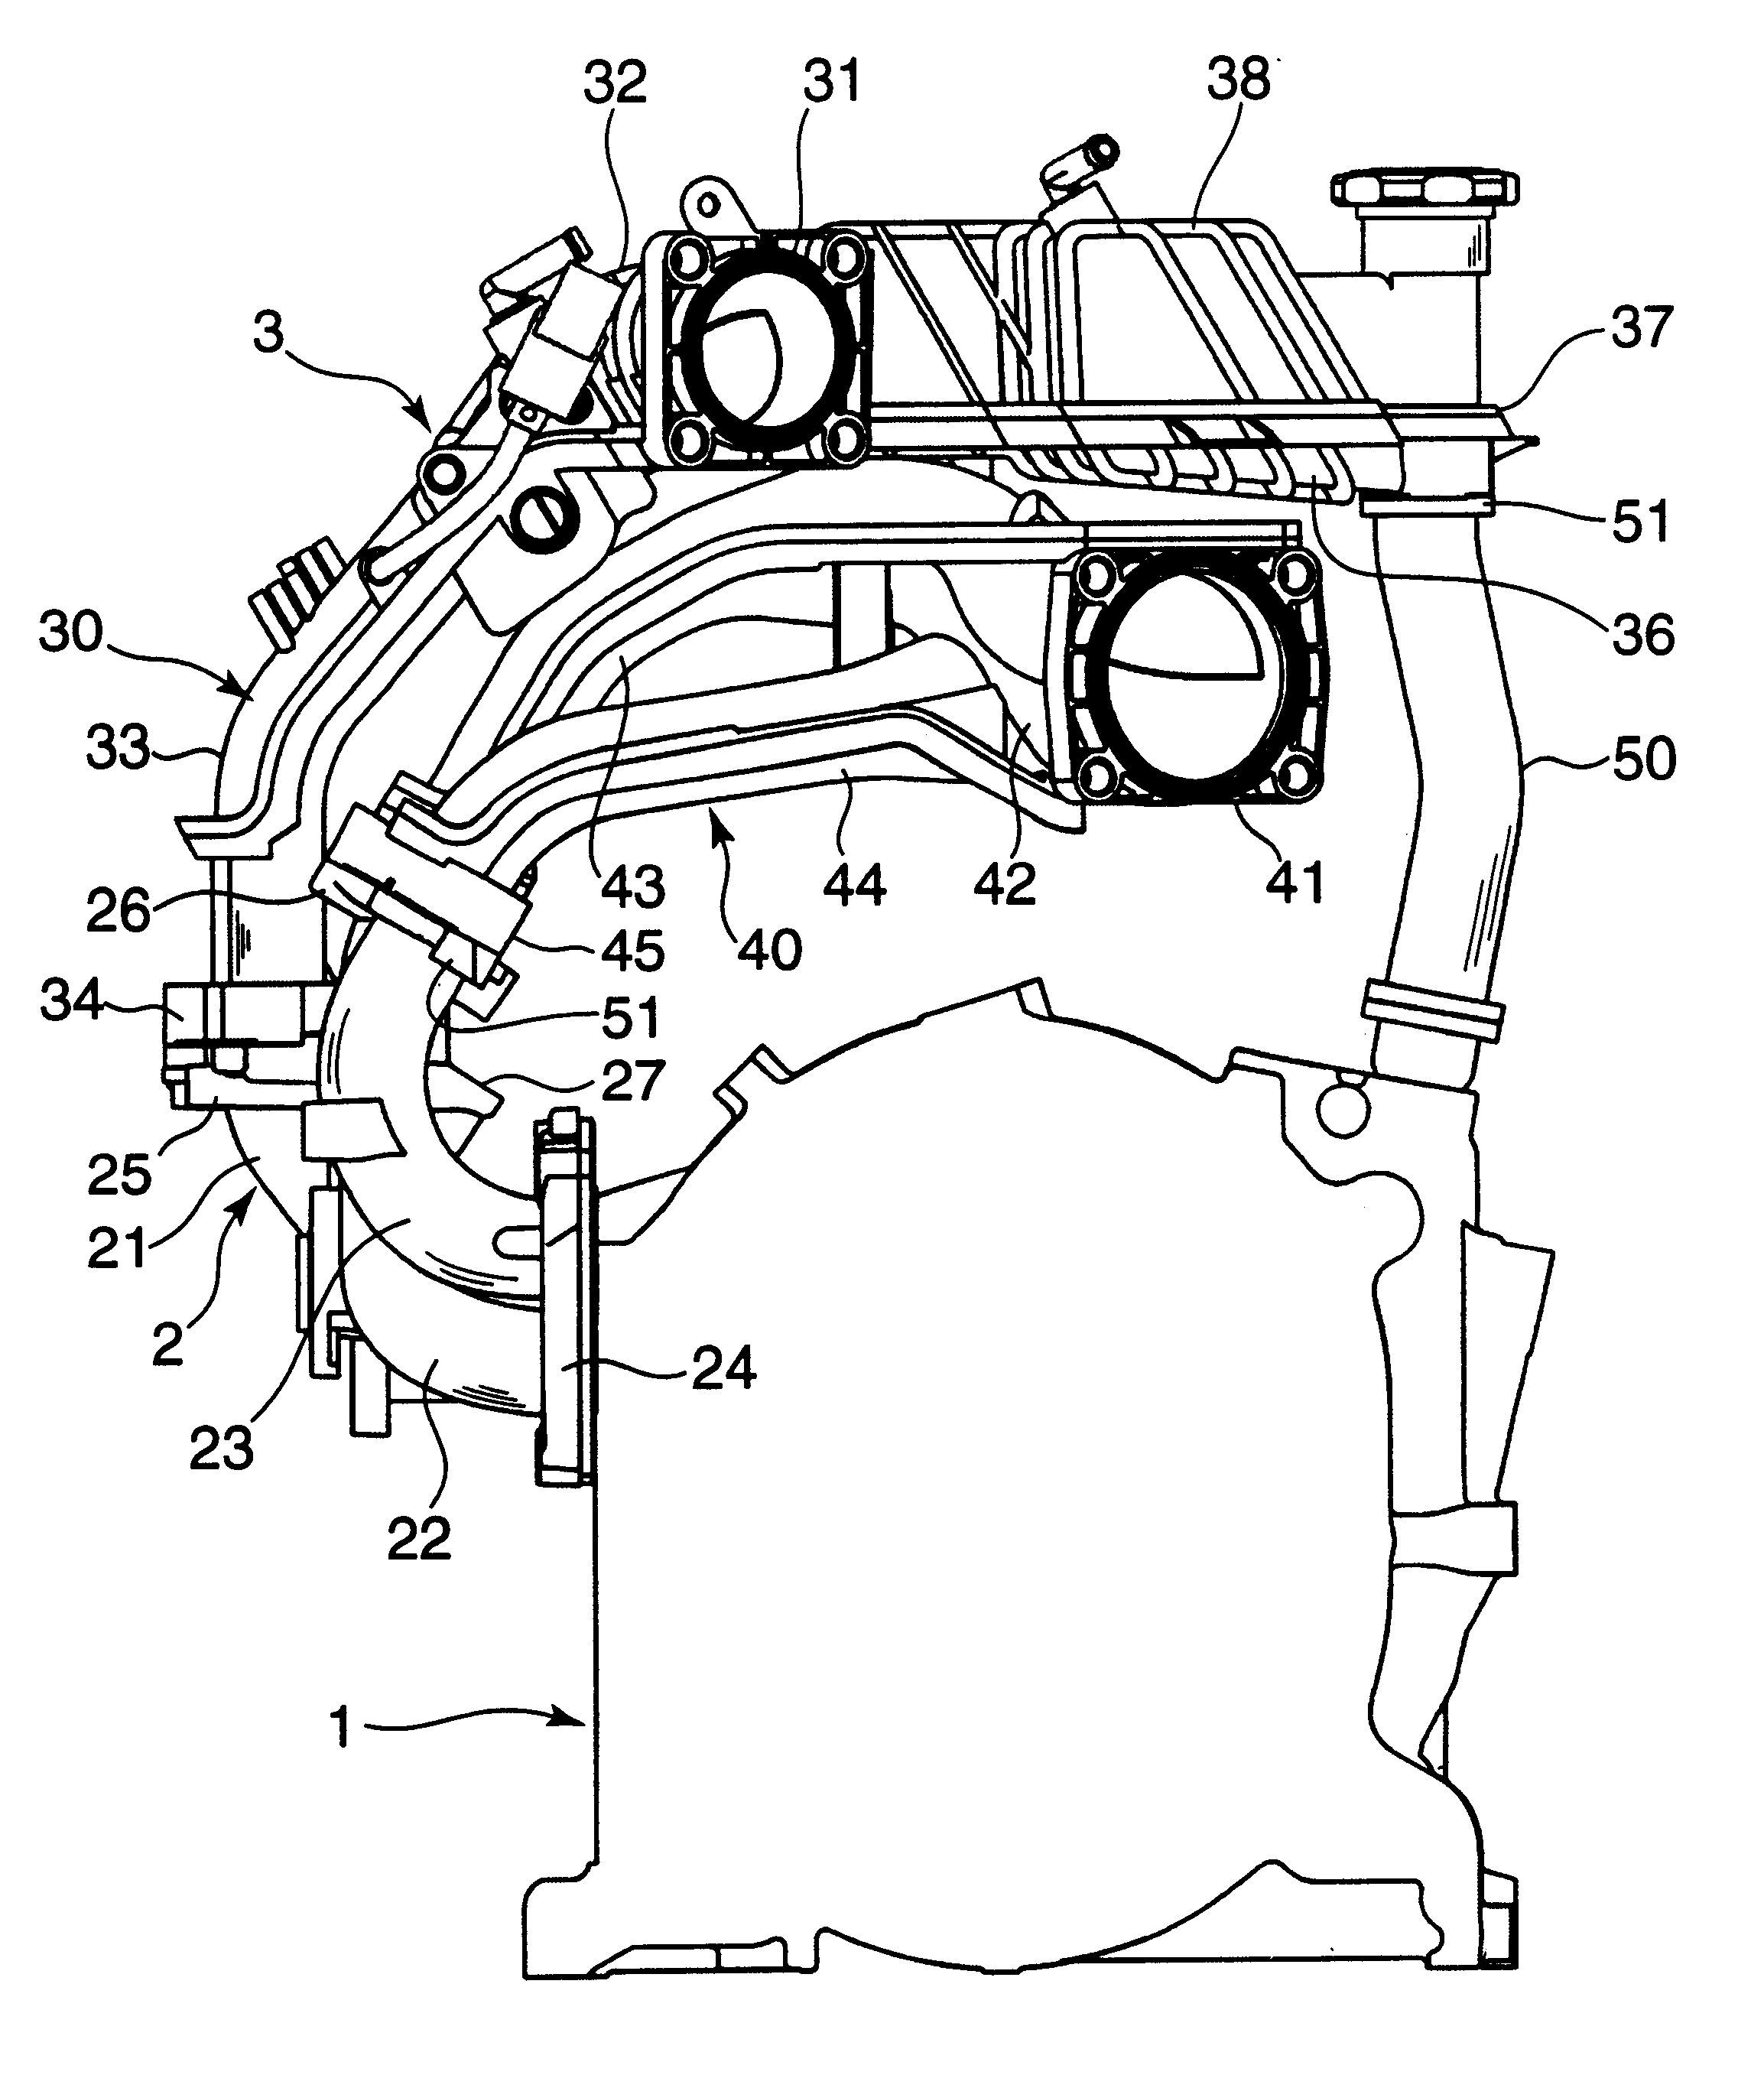 Intake system of an engine